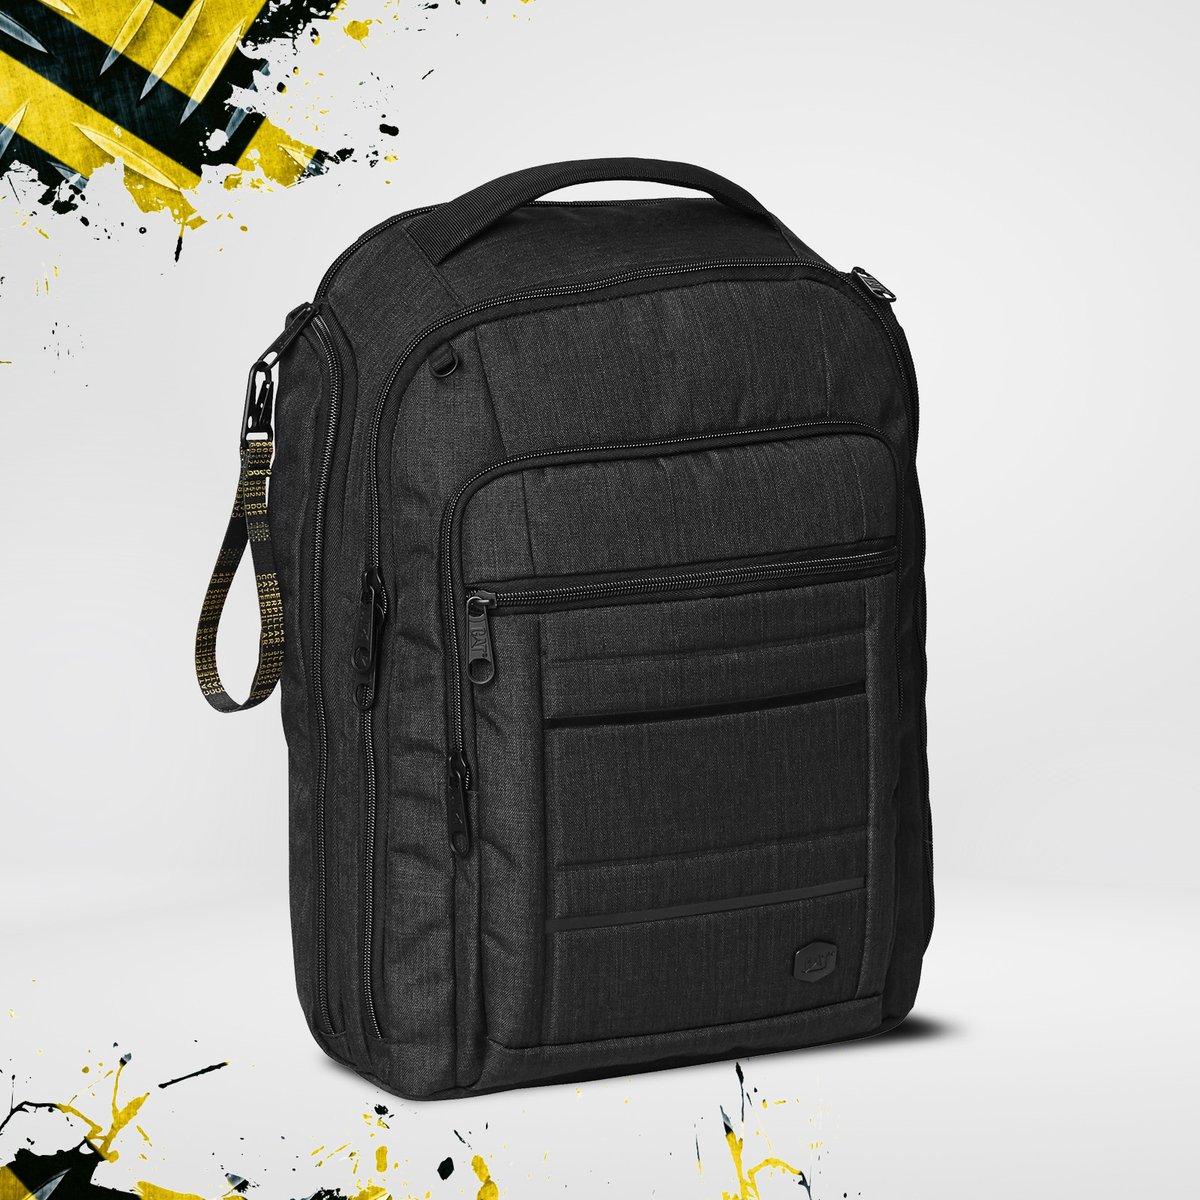 Introducing the B. Holt Business Backpack: A fusion of style and functionality, perfect for the modern professional on the move. Stay organised and make a statement wherever you go. #catfootwearsa #footwear #workshoes #fashion #streetstyle #caterpillar #apparel #catapparel